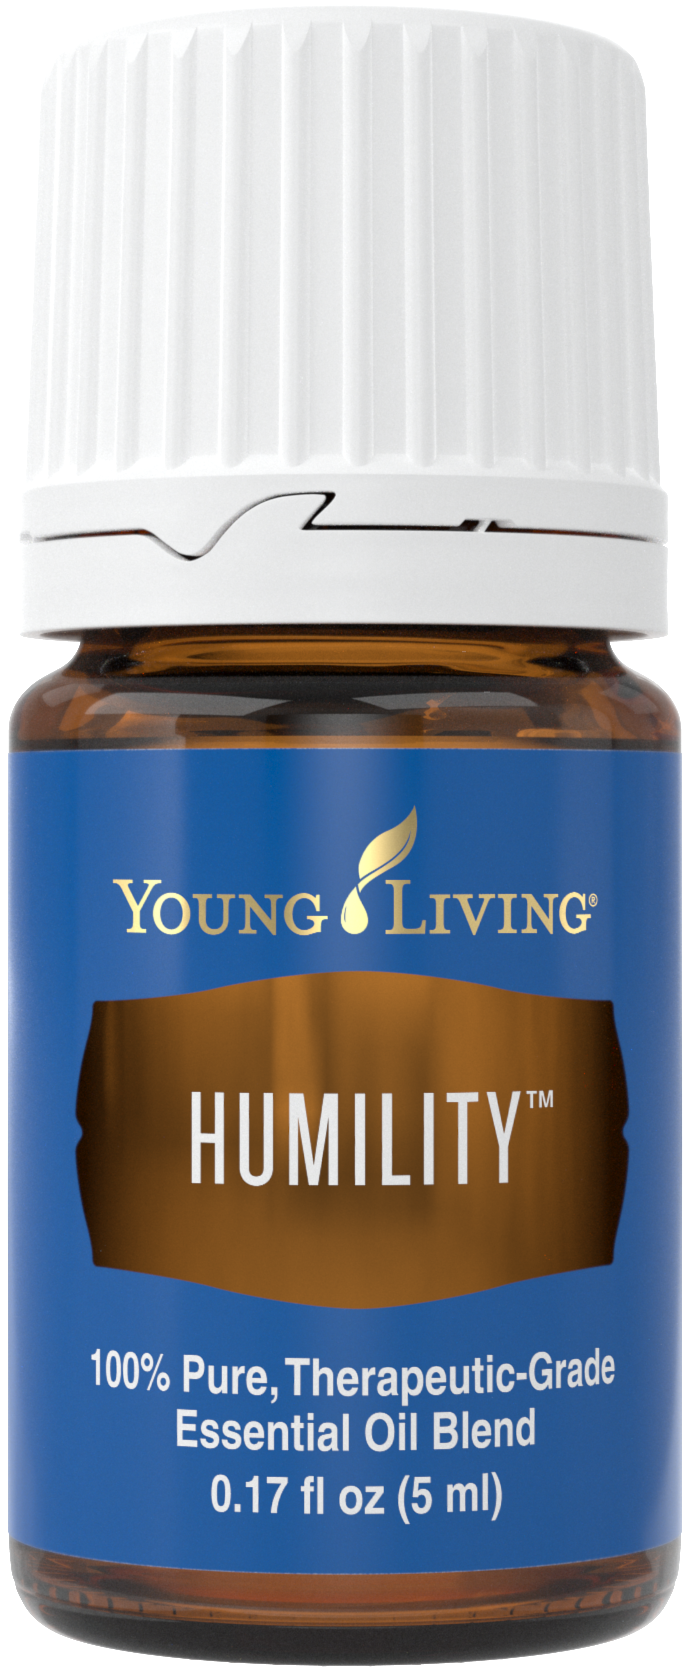 Humility 5ml Silo.png